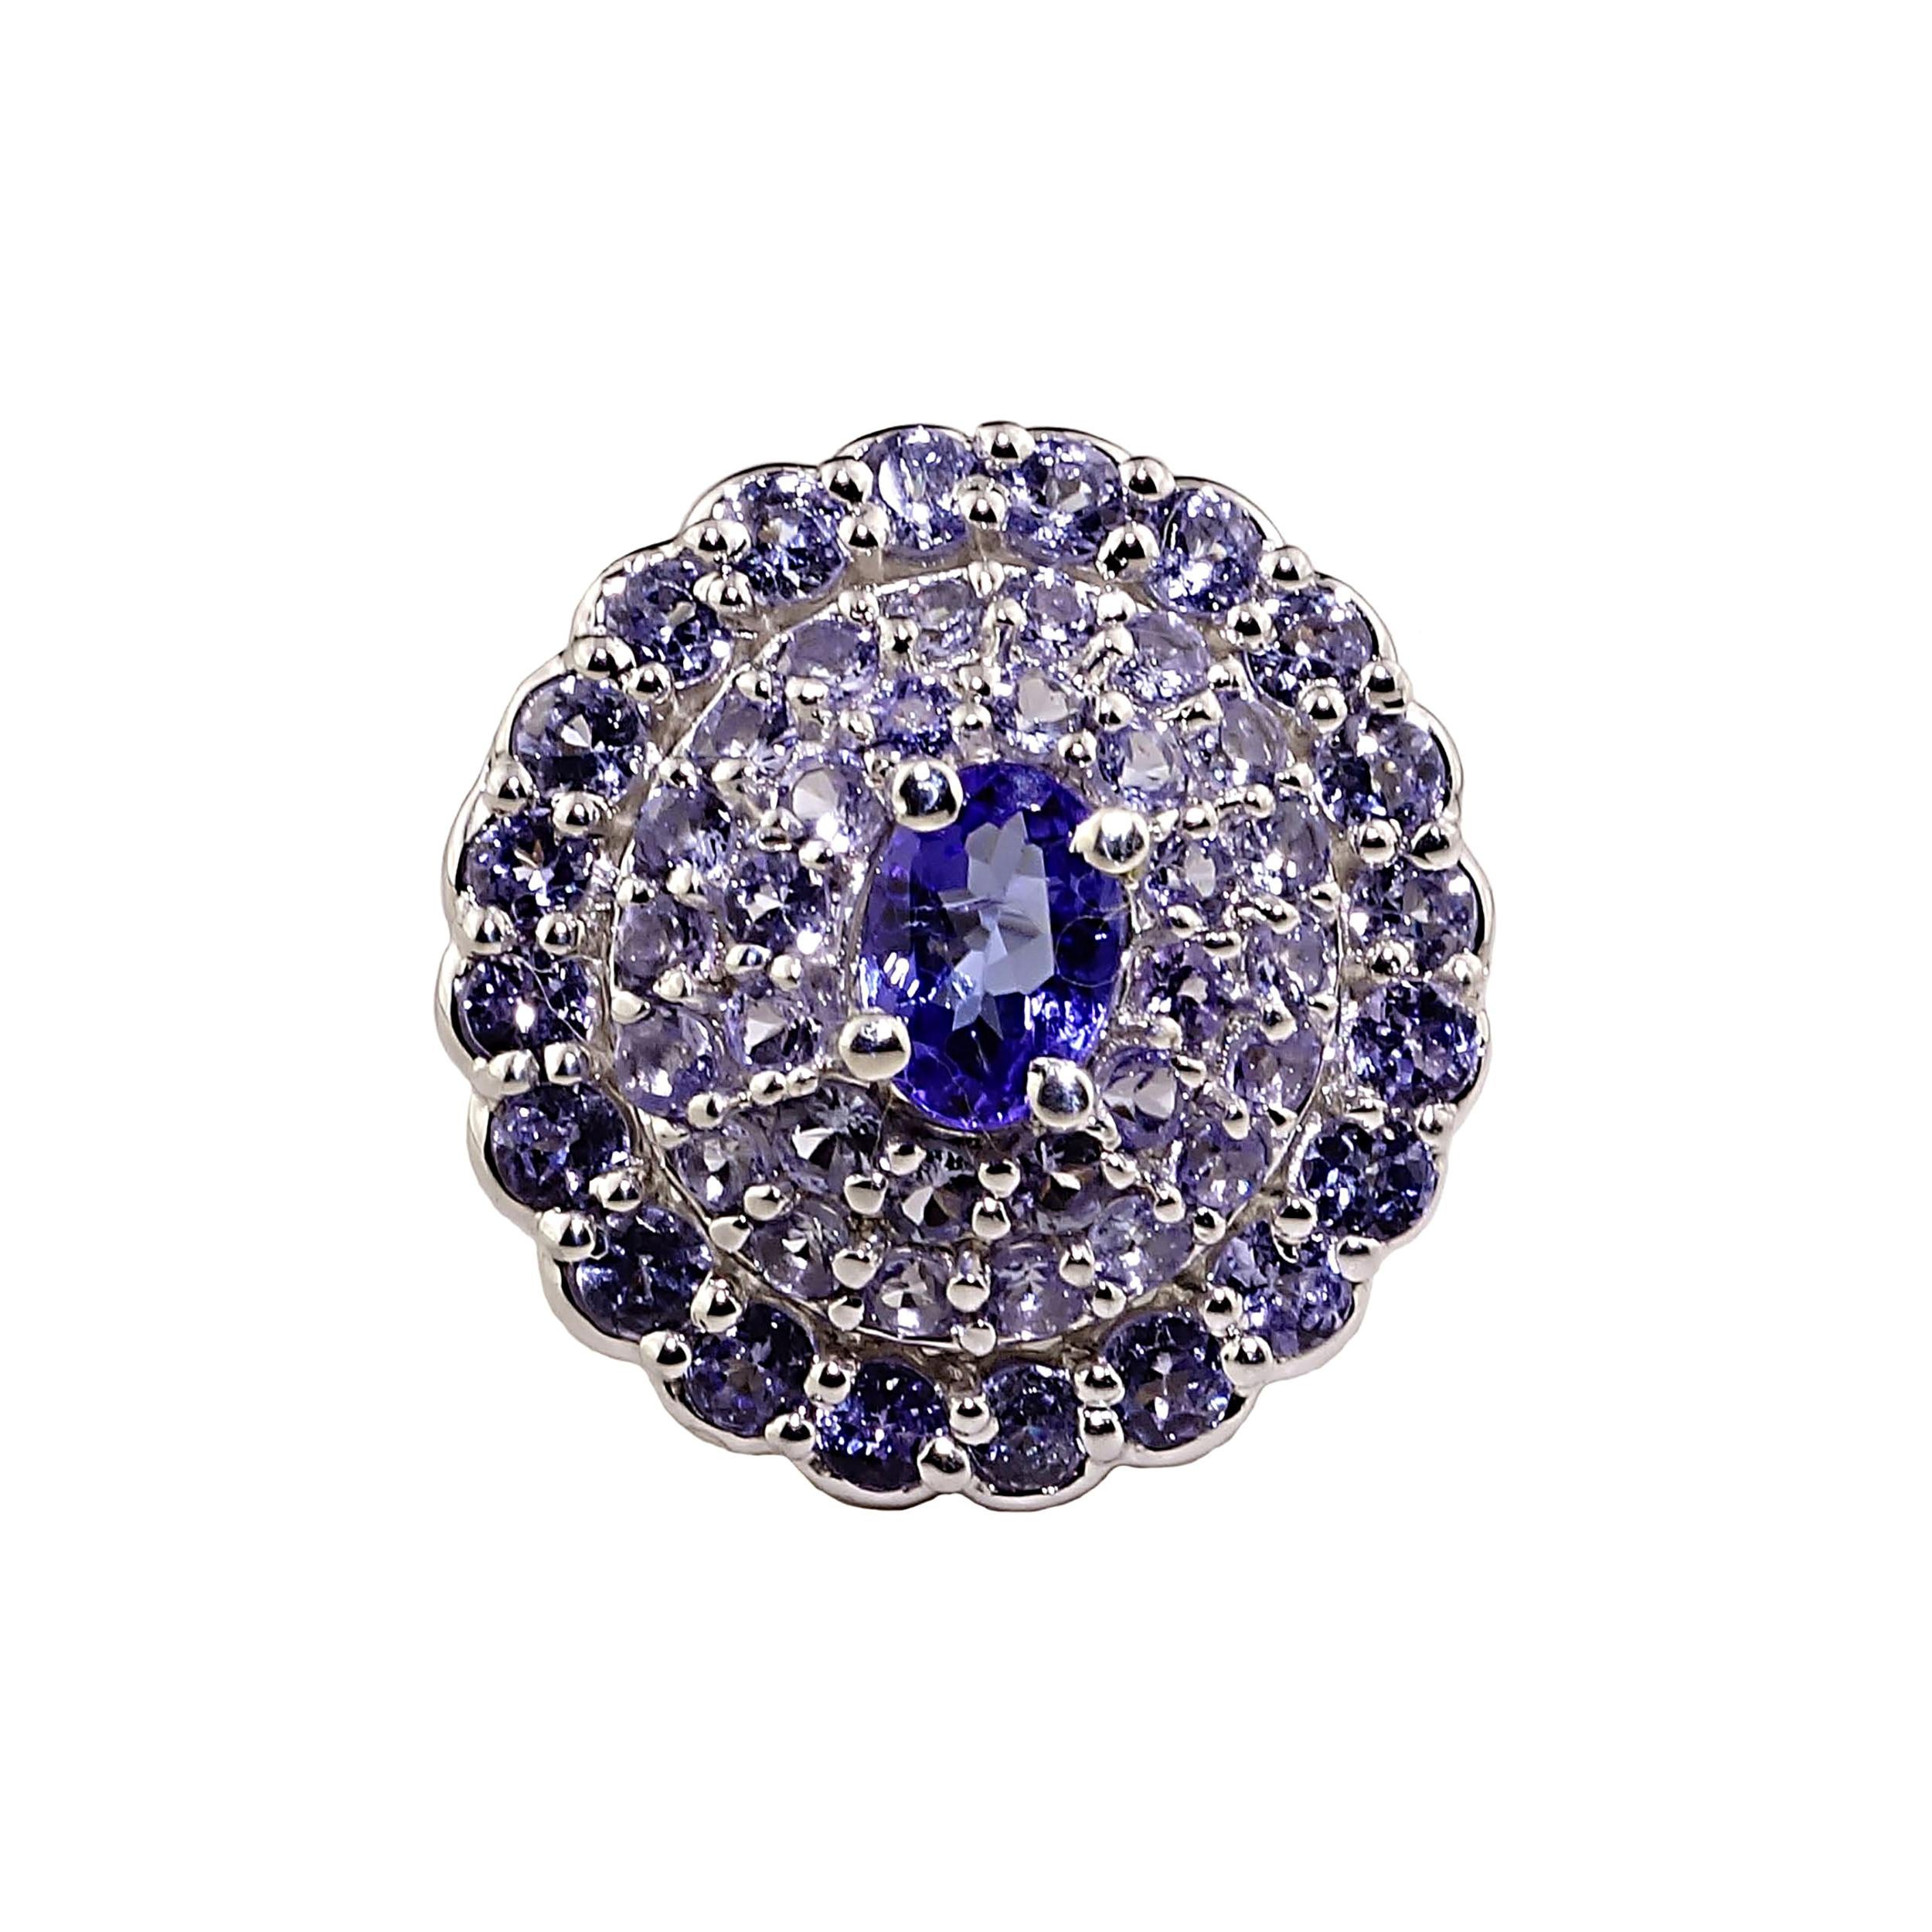 Unique ring of glittering Tanzanites, lots of Tanzanites! Deep blueish/purple oval center stone of 7x5 mm is surrounded by a halo of three rows of sparkling lavender Tanzanites (3.16ct). This is 3/4 of an inch across your finger of glitter.  What a